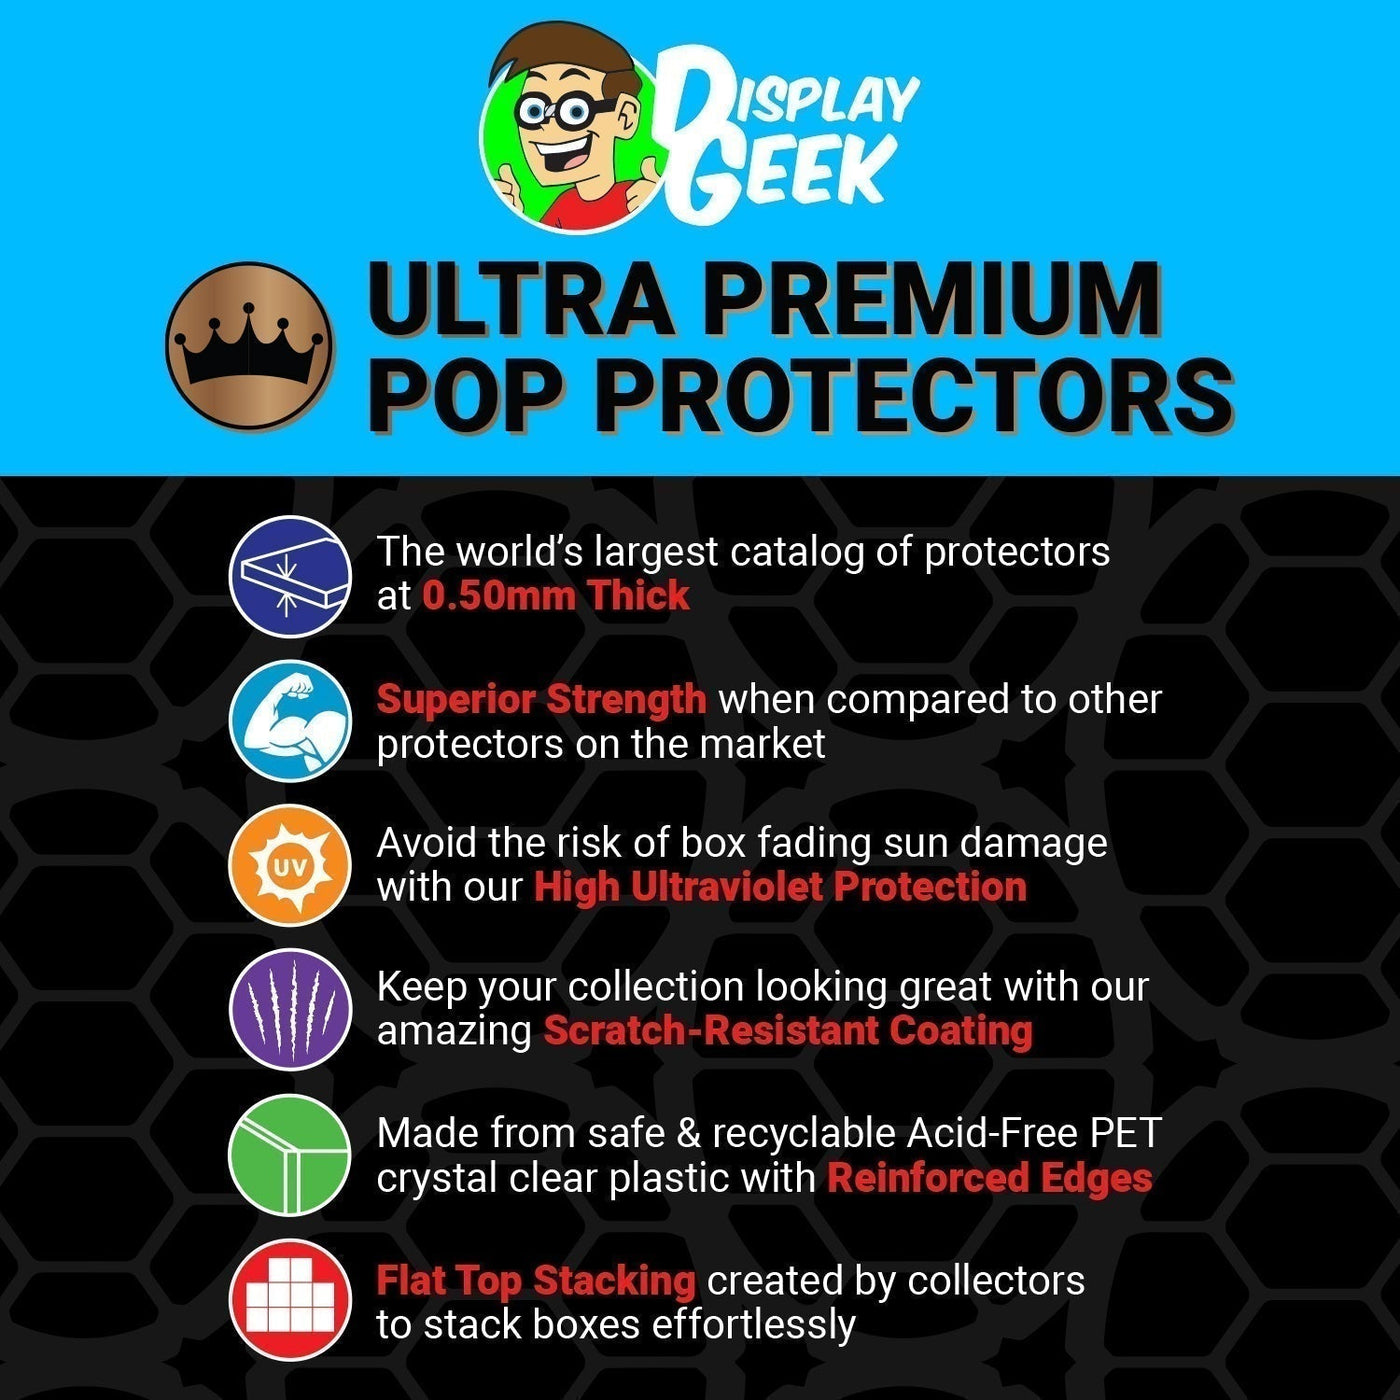 Pop Protector for 2 Pack Demon Slayer Tanjiro & Nezuko Funko Pop on The Protector Guide App by Display Geek